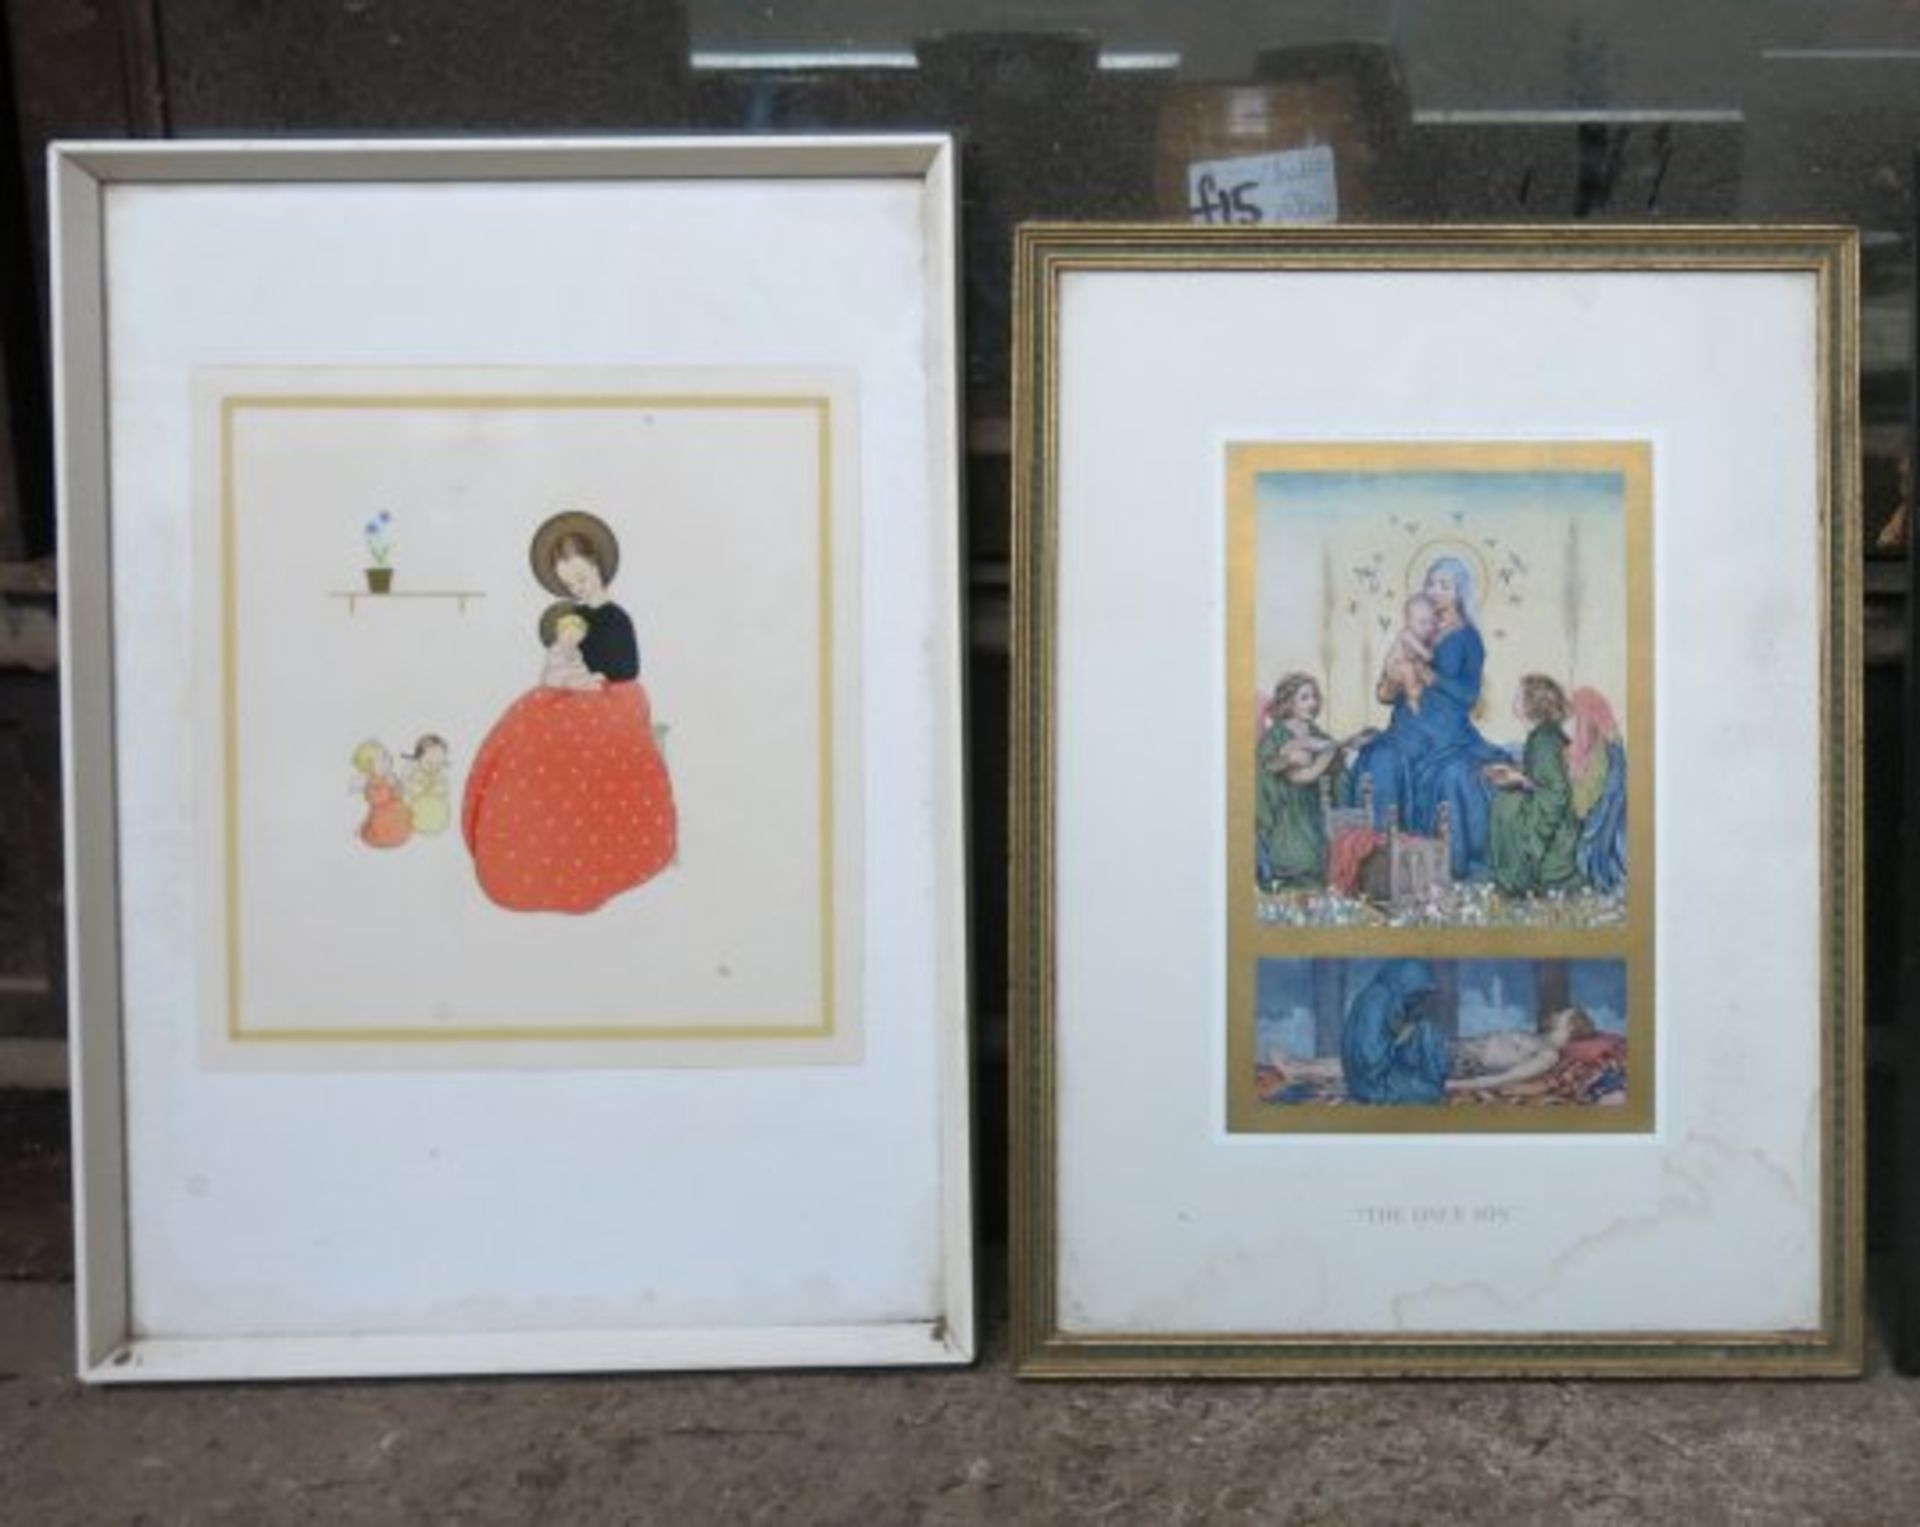 The Only Son and Lucy Atwell type Prints